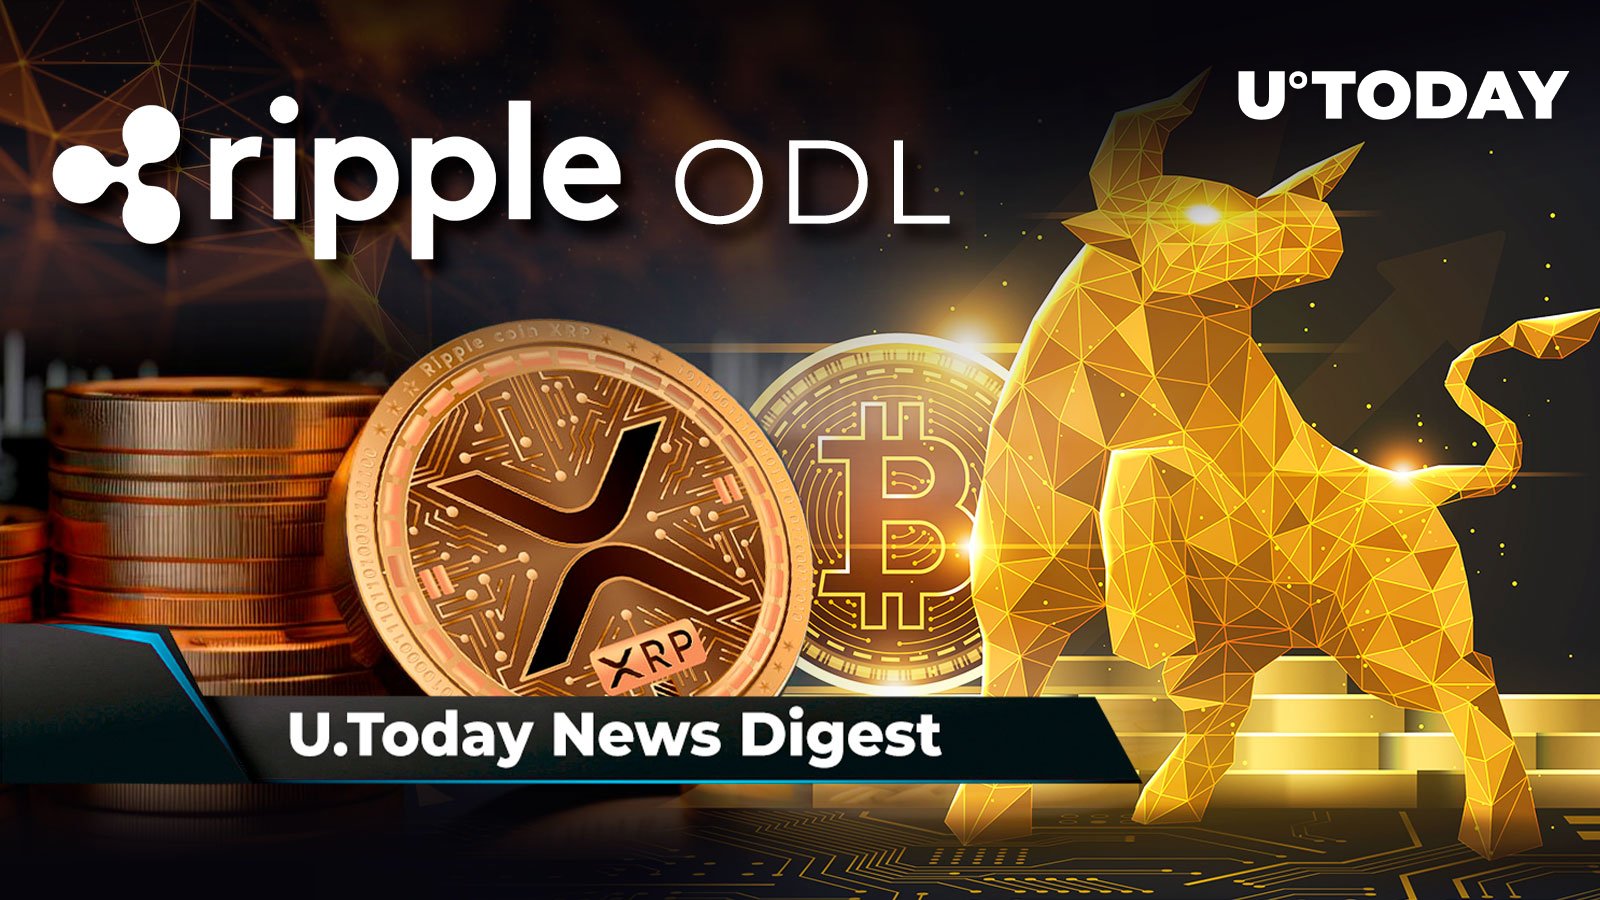 ripple-sensationally-rebrands-odl-service-ultra-bullish-divergence-found-on-important-btc-index-blackrock-rumored-to-shift-its-focus-to-xrp-crypto-news-digest-by-u-today